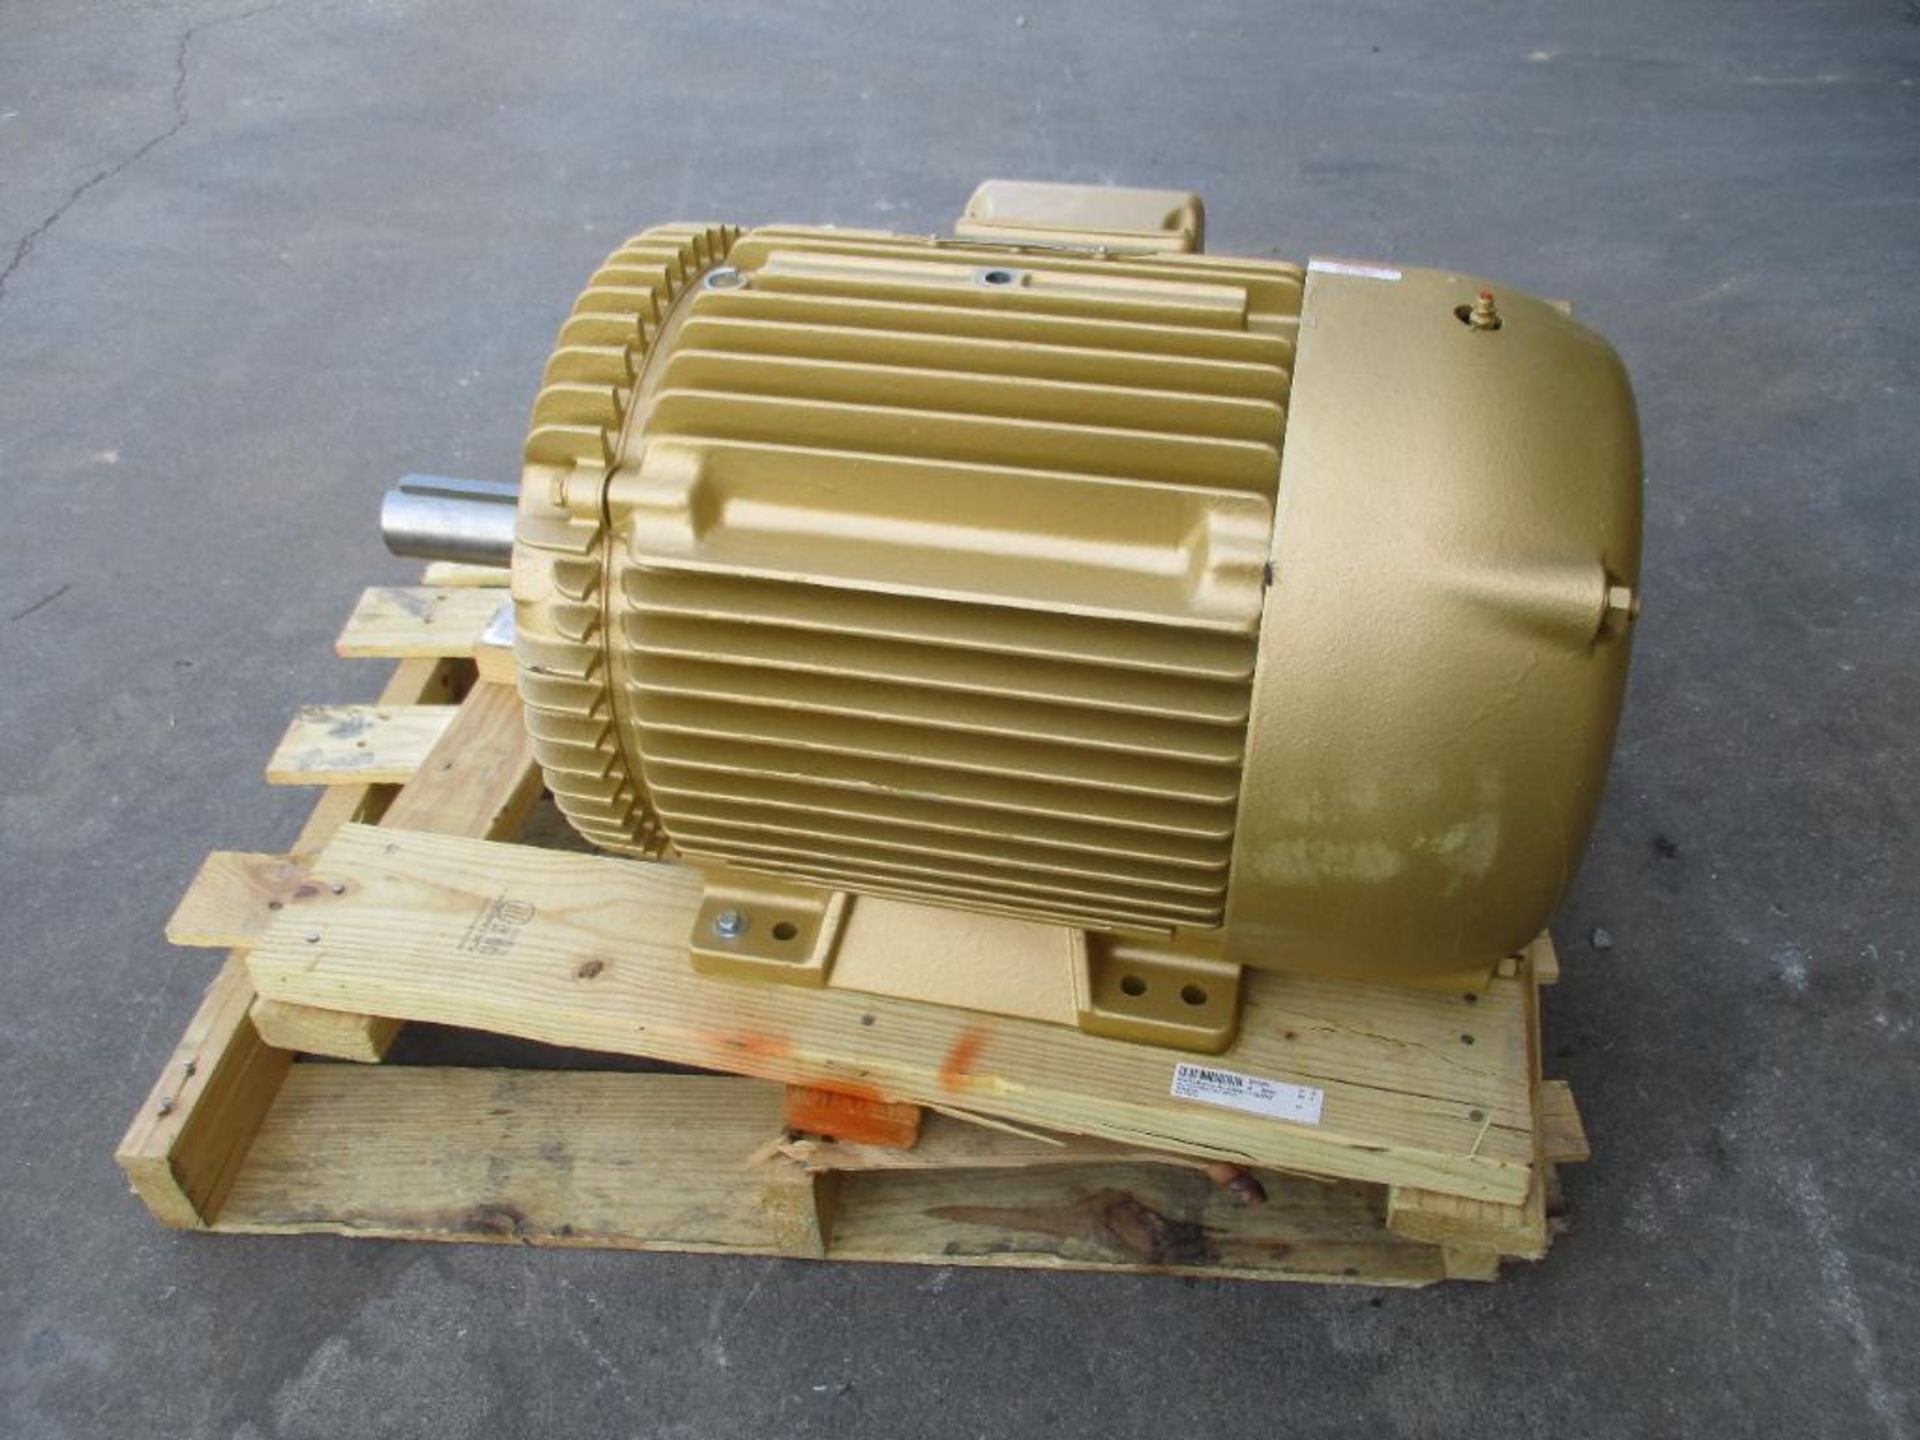 BALDOR 3 PHASE 40HP 1775RPM 324T FRAME A/C MOTOR P/N EM4110T 585# LBS (THIS LOT IS FOB KNOXVILLE TN)